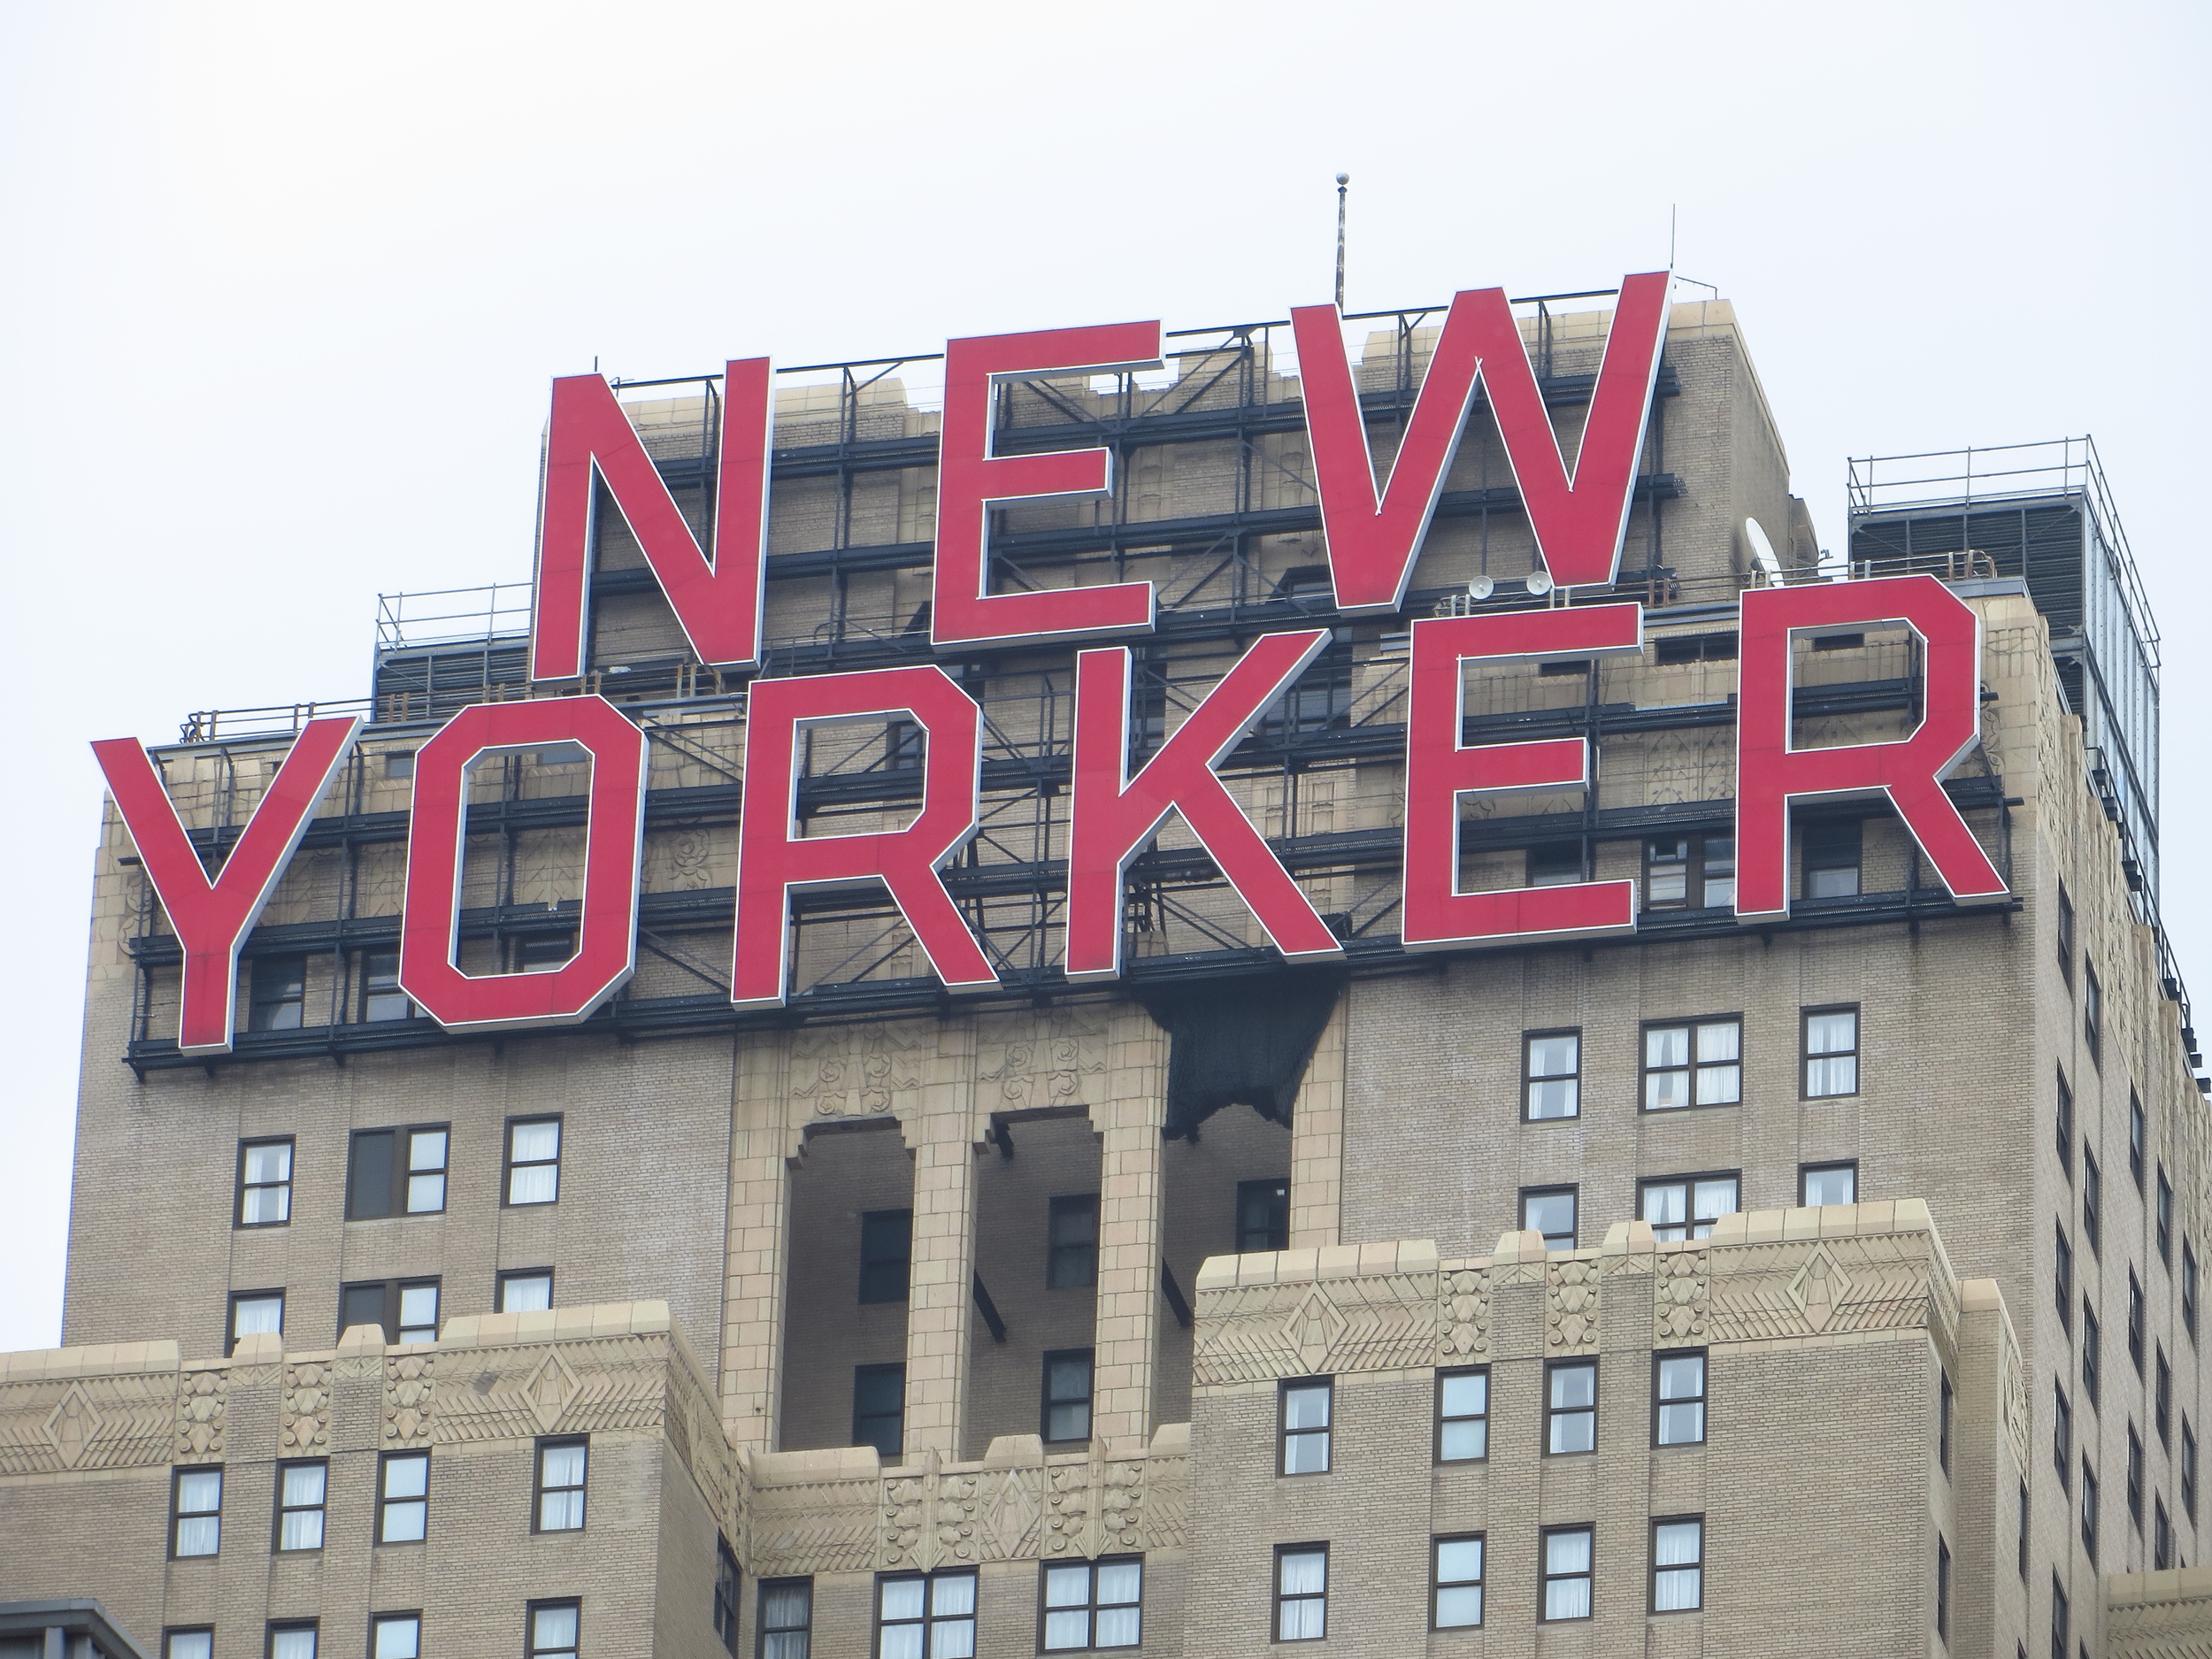 New Yorker Hotel sign